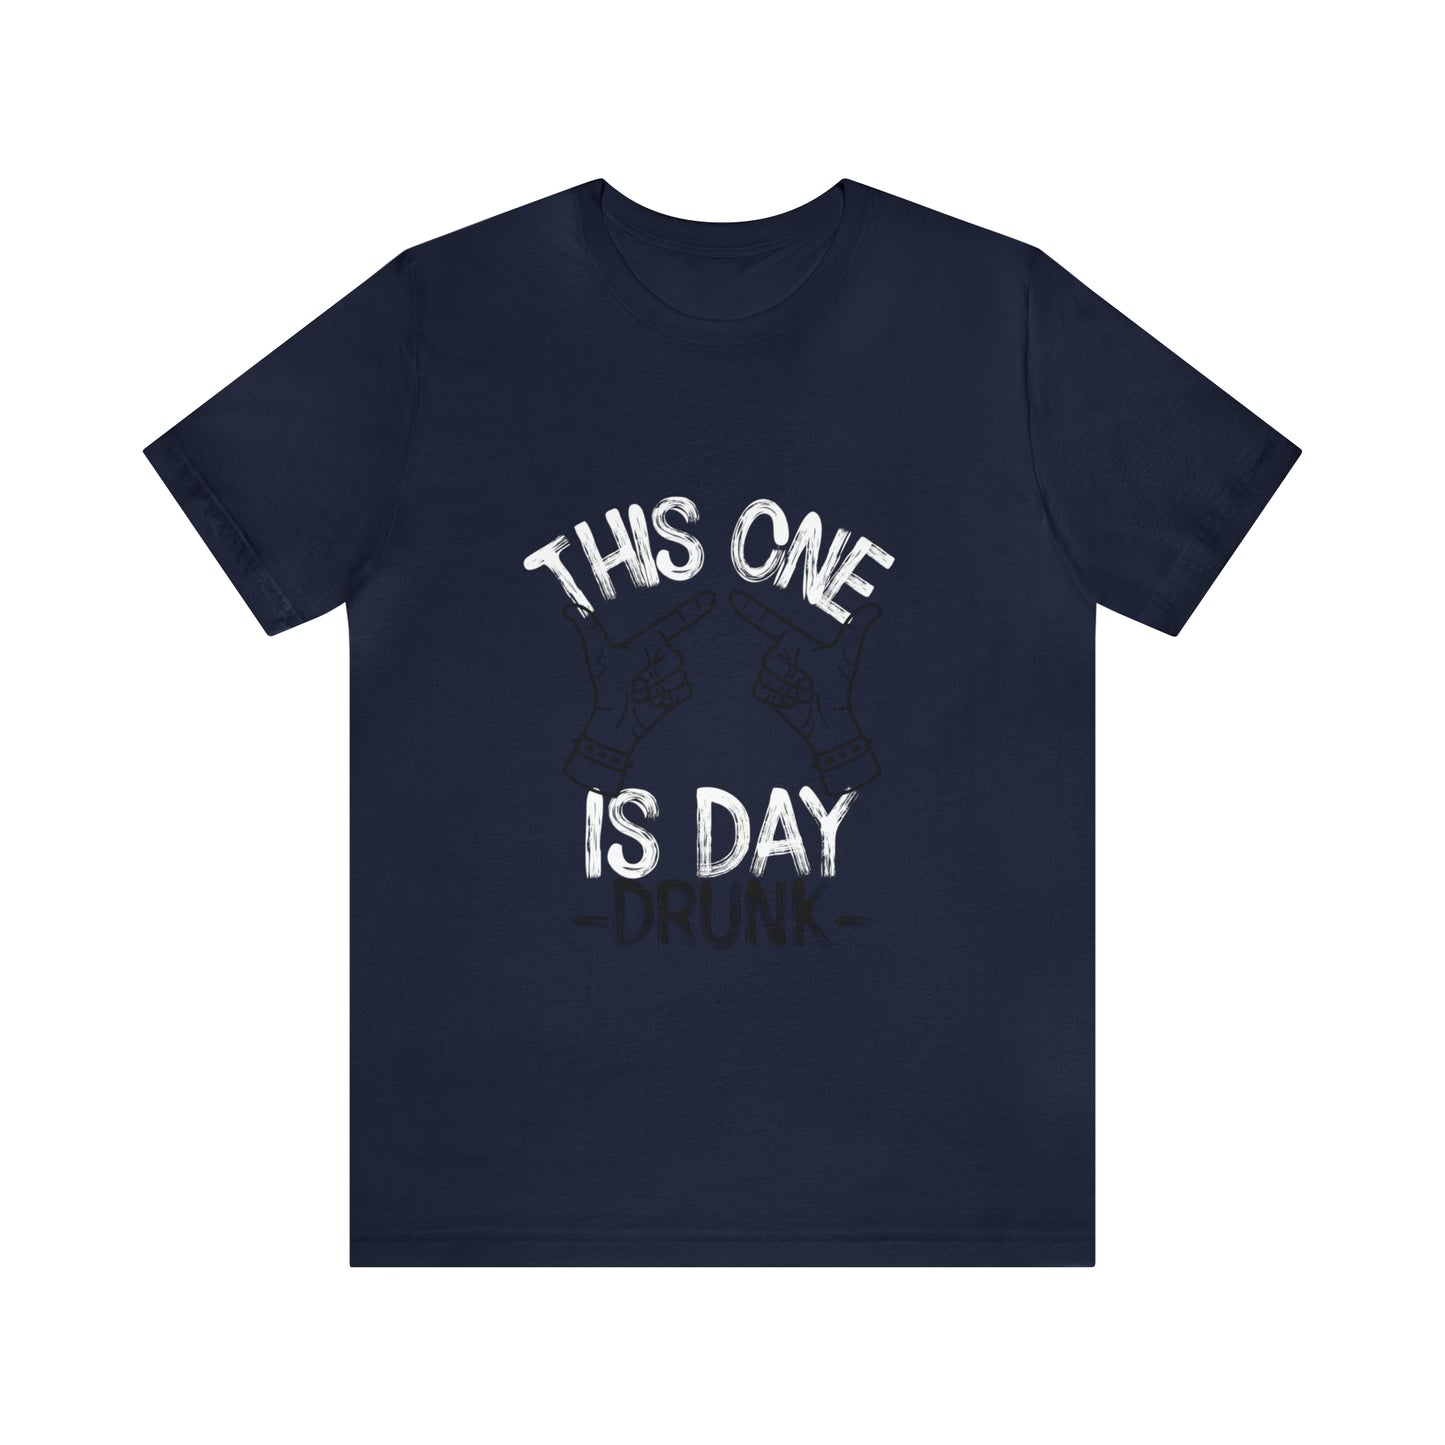 This One Is Day Drunk - Unisex T-Shirt